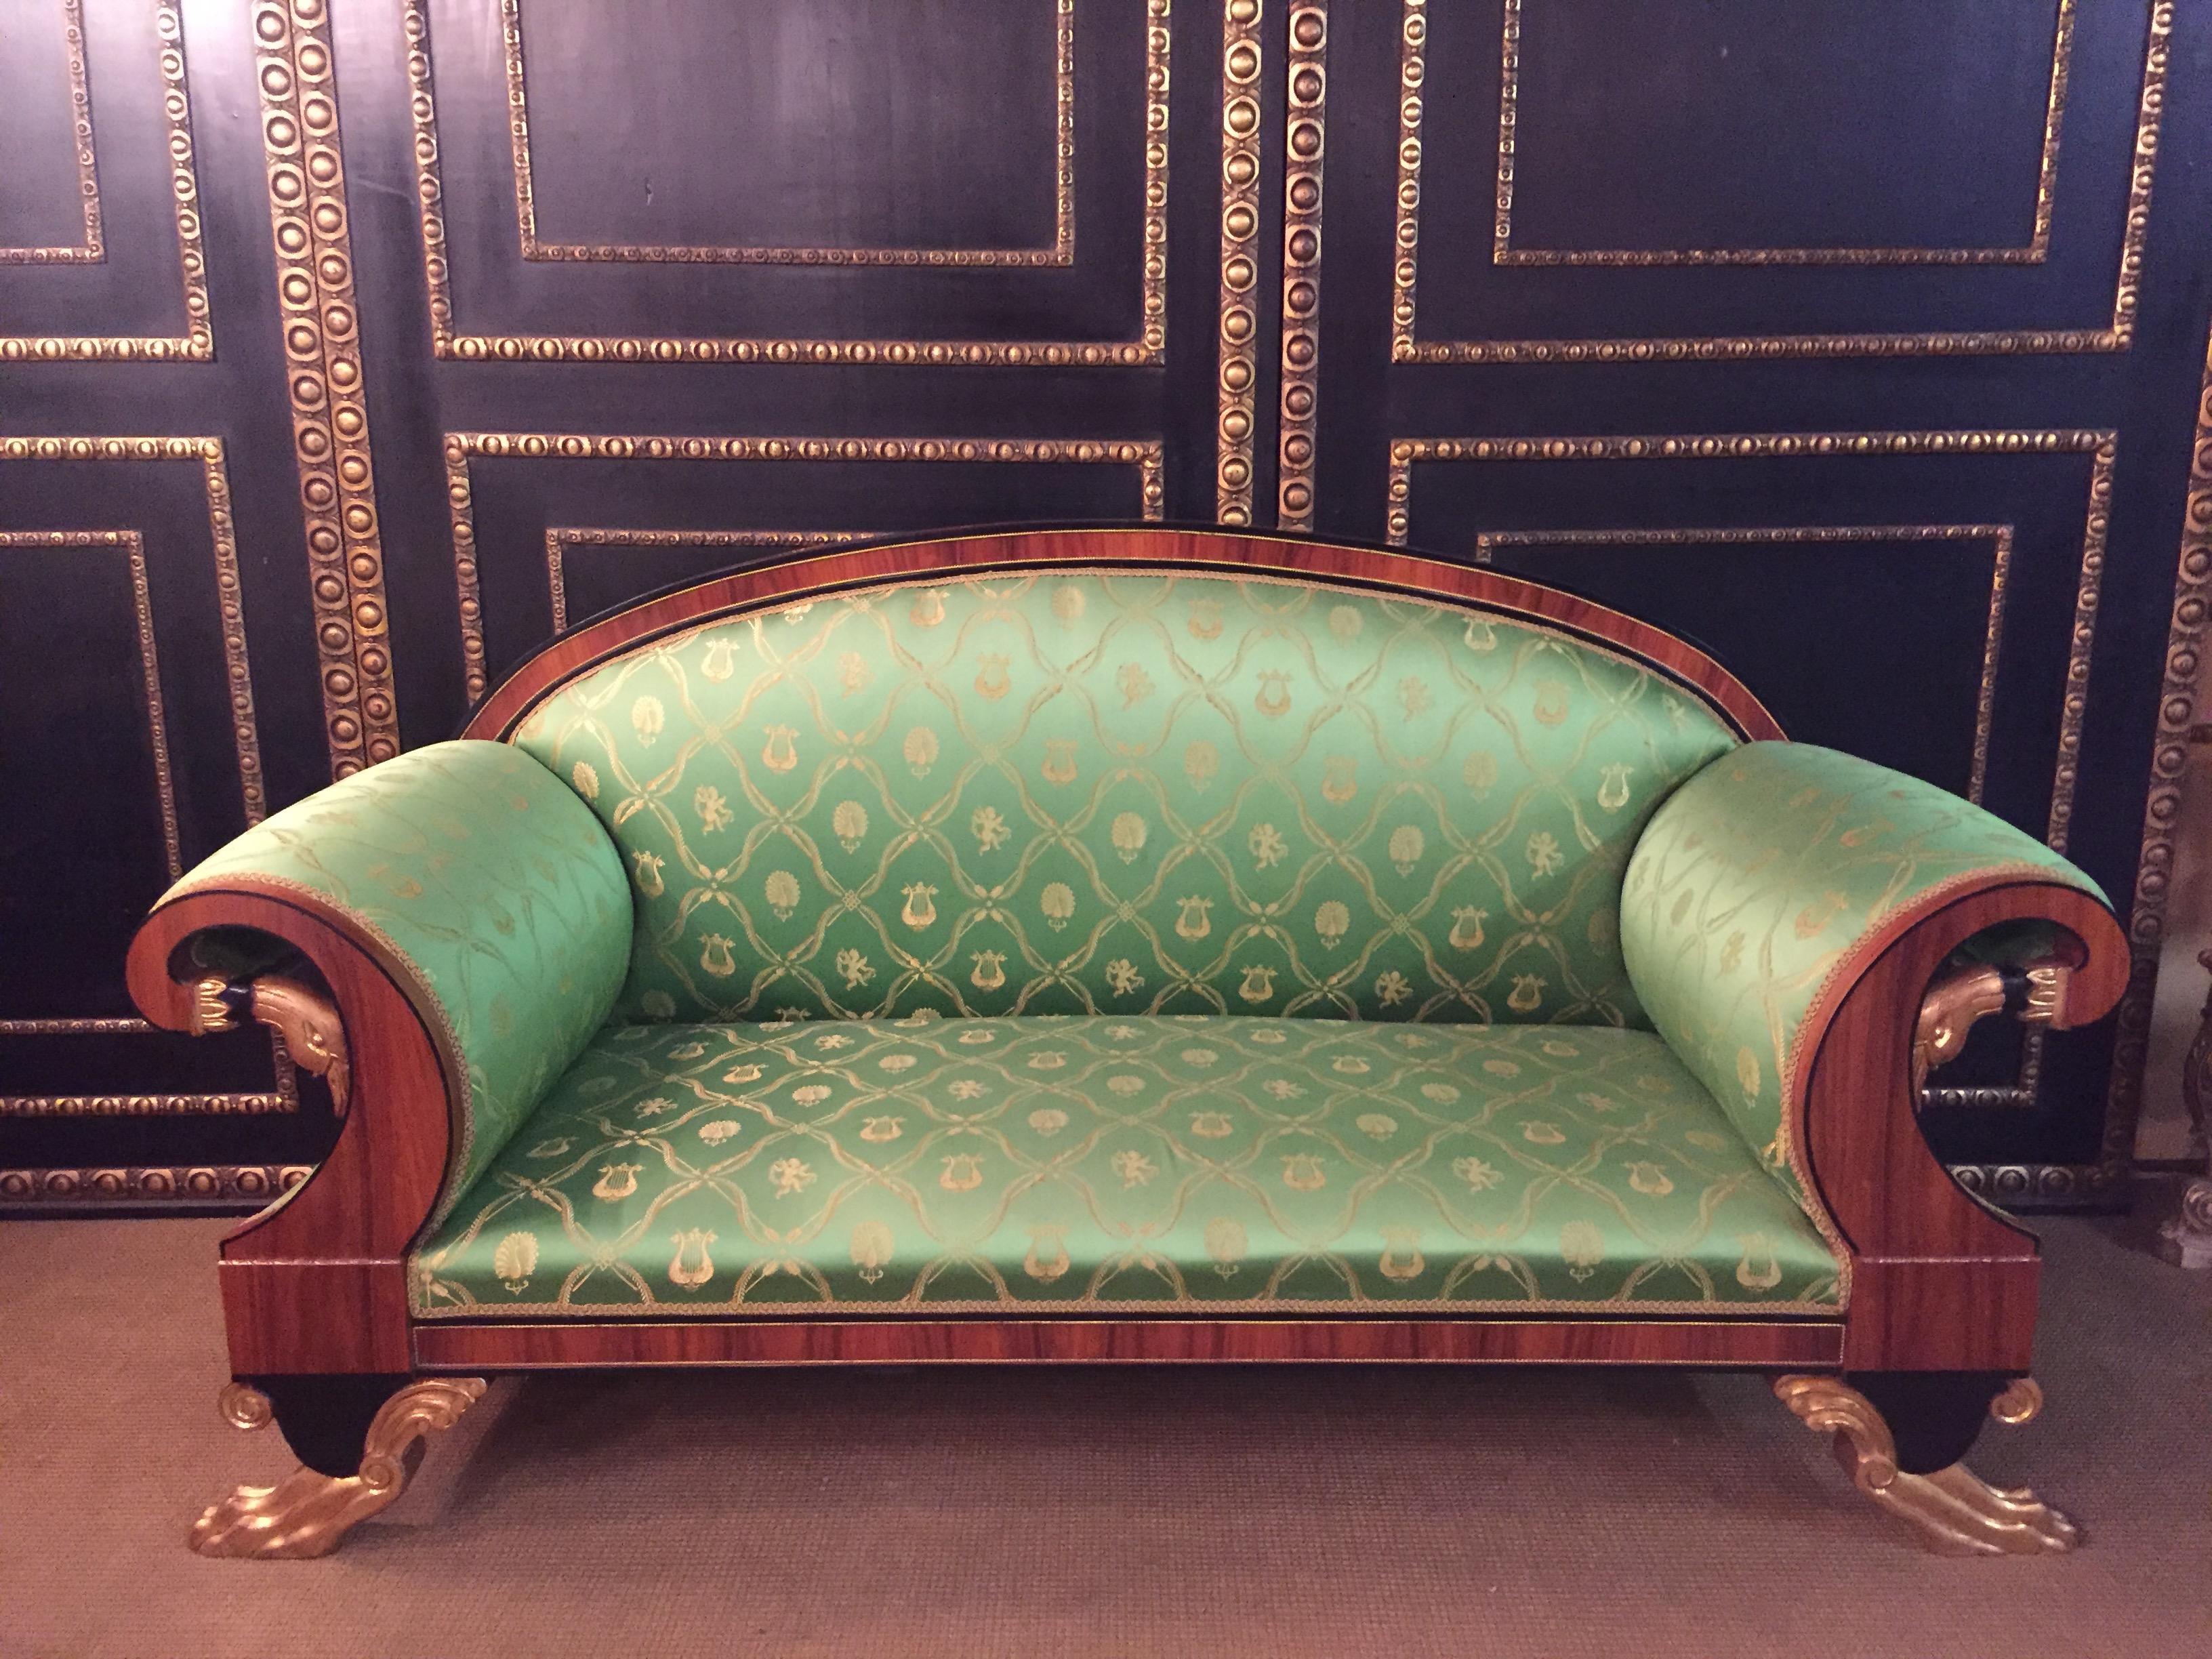 Empire Swan  canapé in the style of Classicism (1810). Exotic palisander on solid beechwood. Partially ebonized and gilded.
On each side a carved swan's head.
Very high quality satin fabric.
The feet carved in paws.